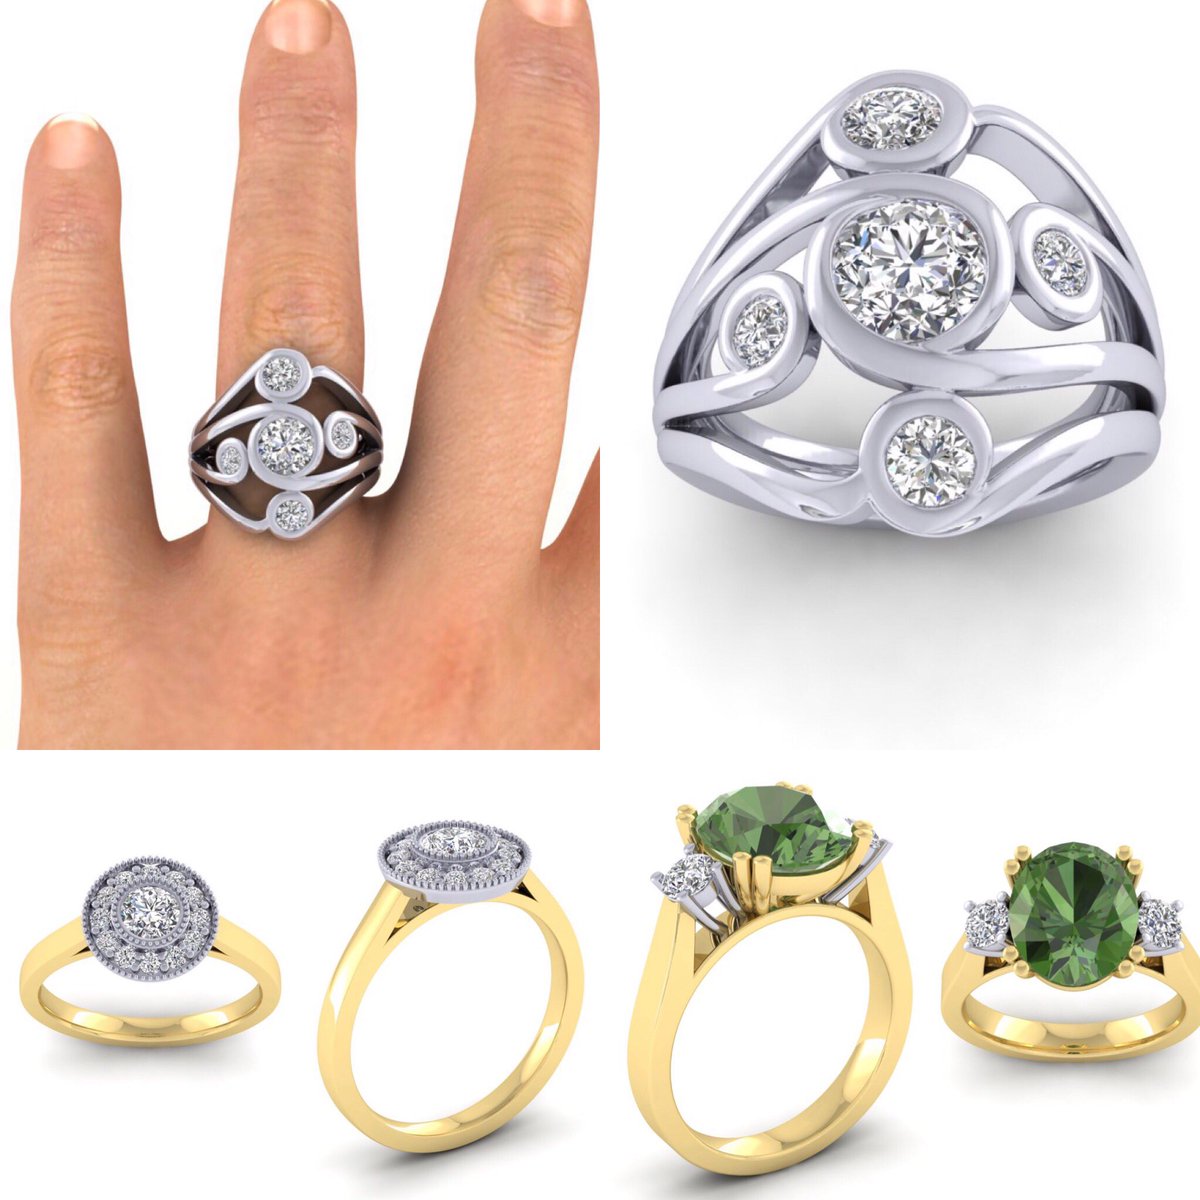 Just a few of the rings I’m making at the moment, why not call in and let me design something unique for you @GoldencraftL36 @Joseph75172069 @KerrysFitness2 @Nikkis_Dresses @Harpers_ltd @hvfoodiefriday #goldencraftjewellers #Huytonvillage #design